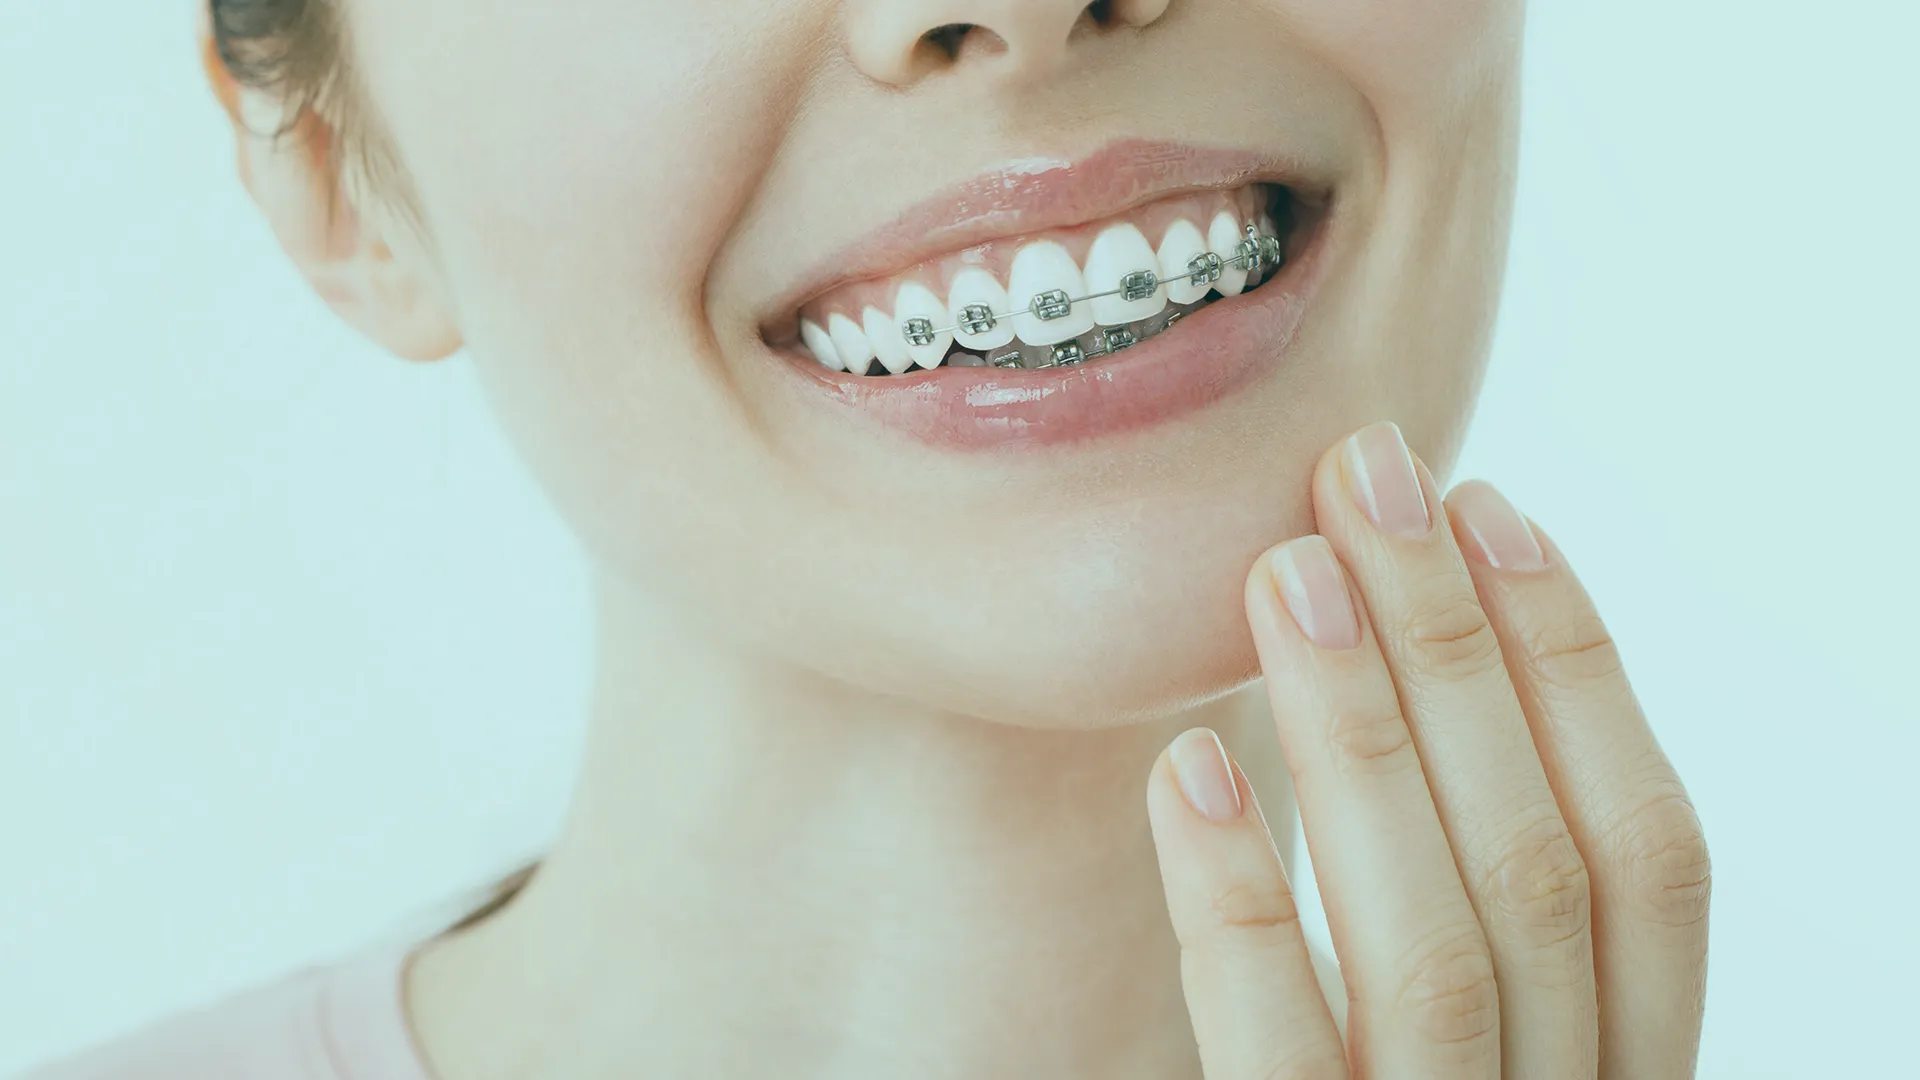 Orthodontics in Turkey, providing good orthodontic treatments and high-quality care for straightening teeth and improving smiles.